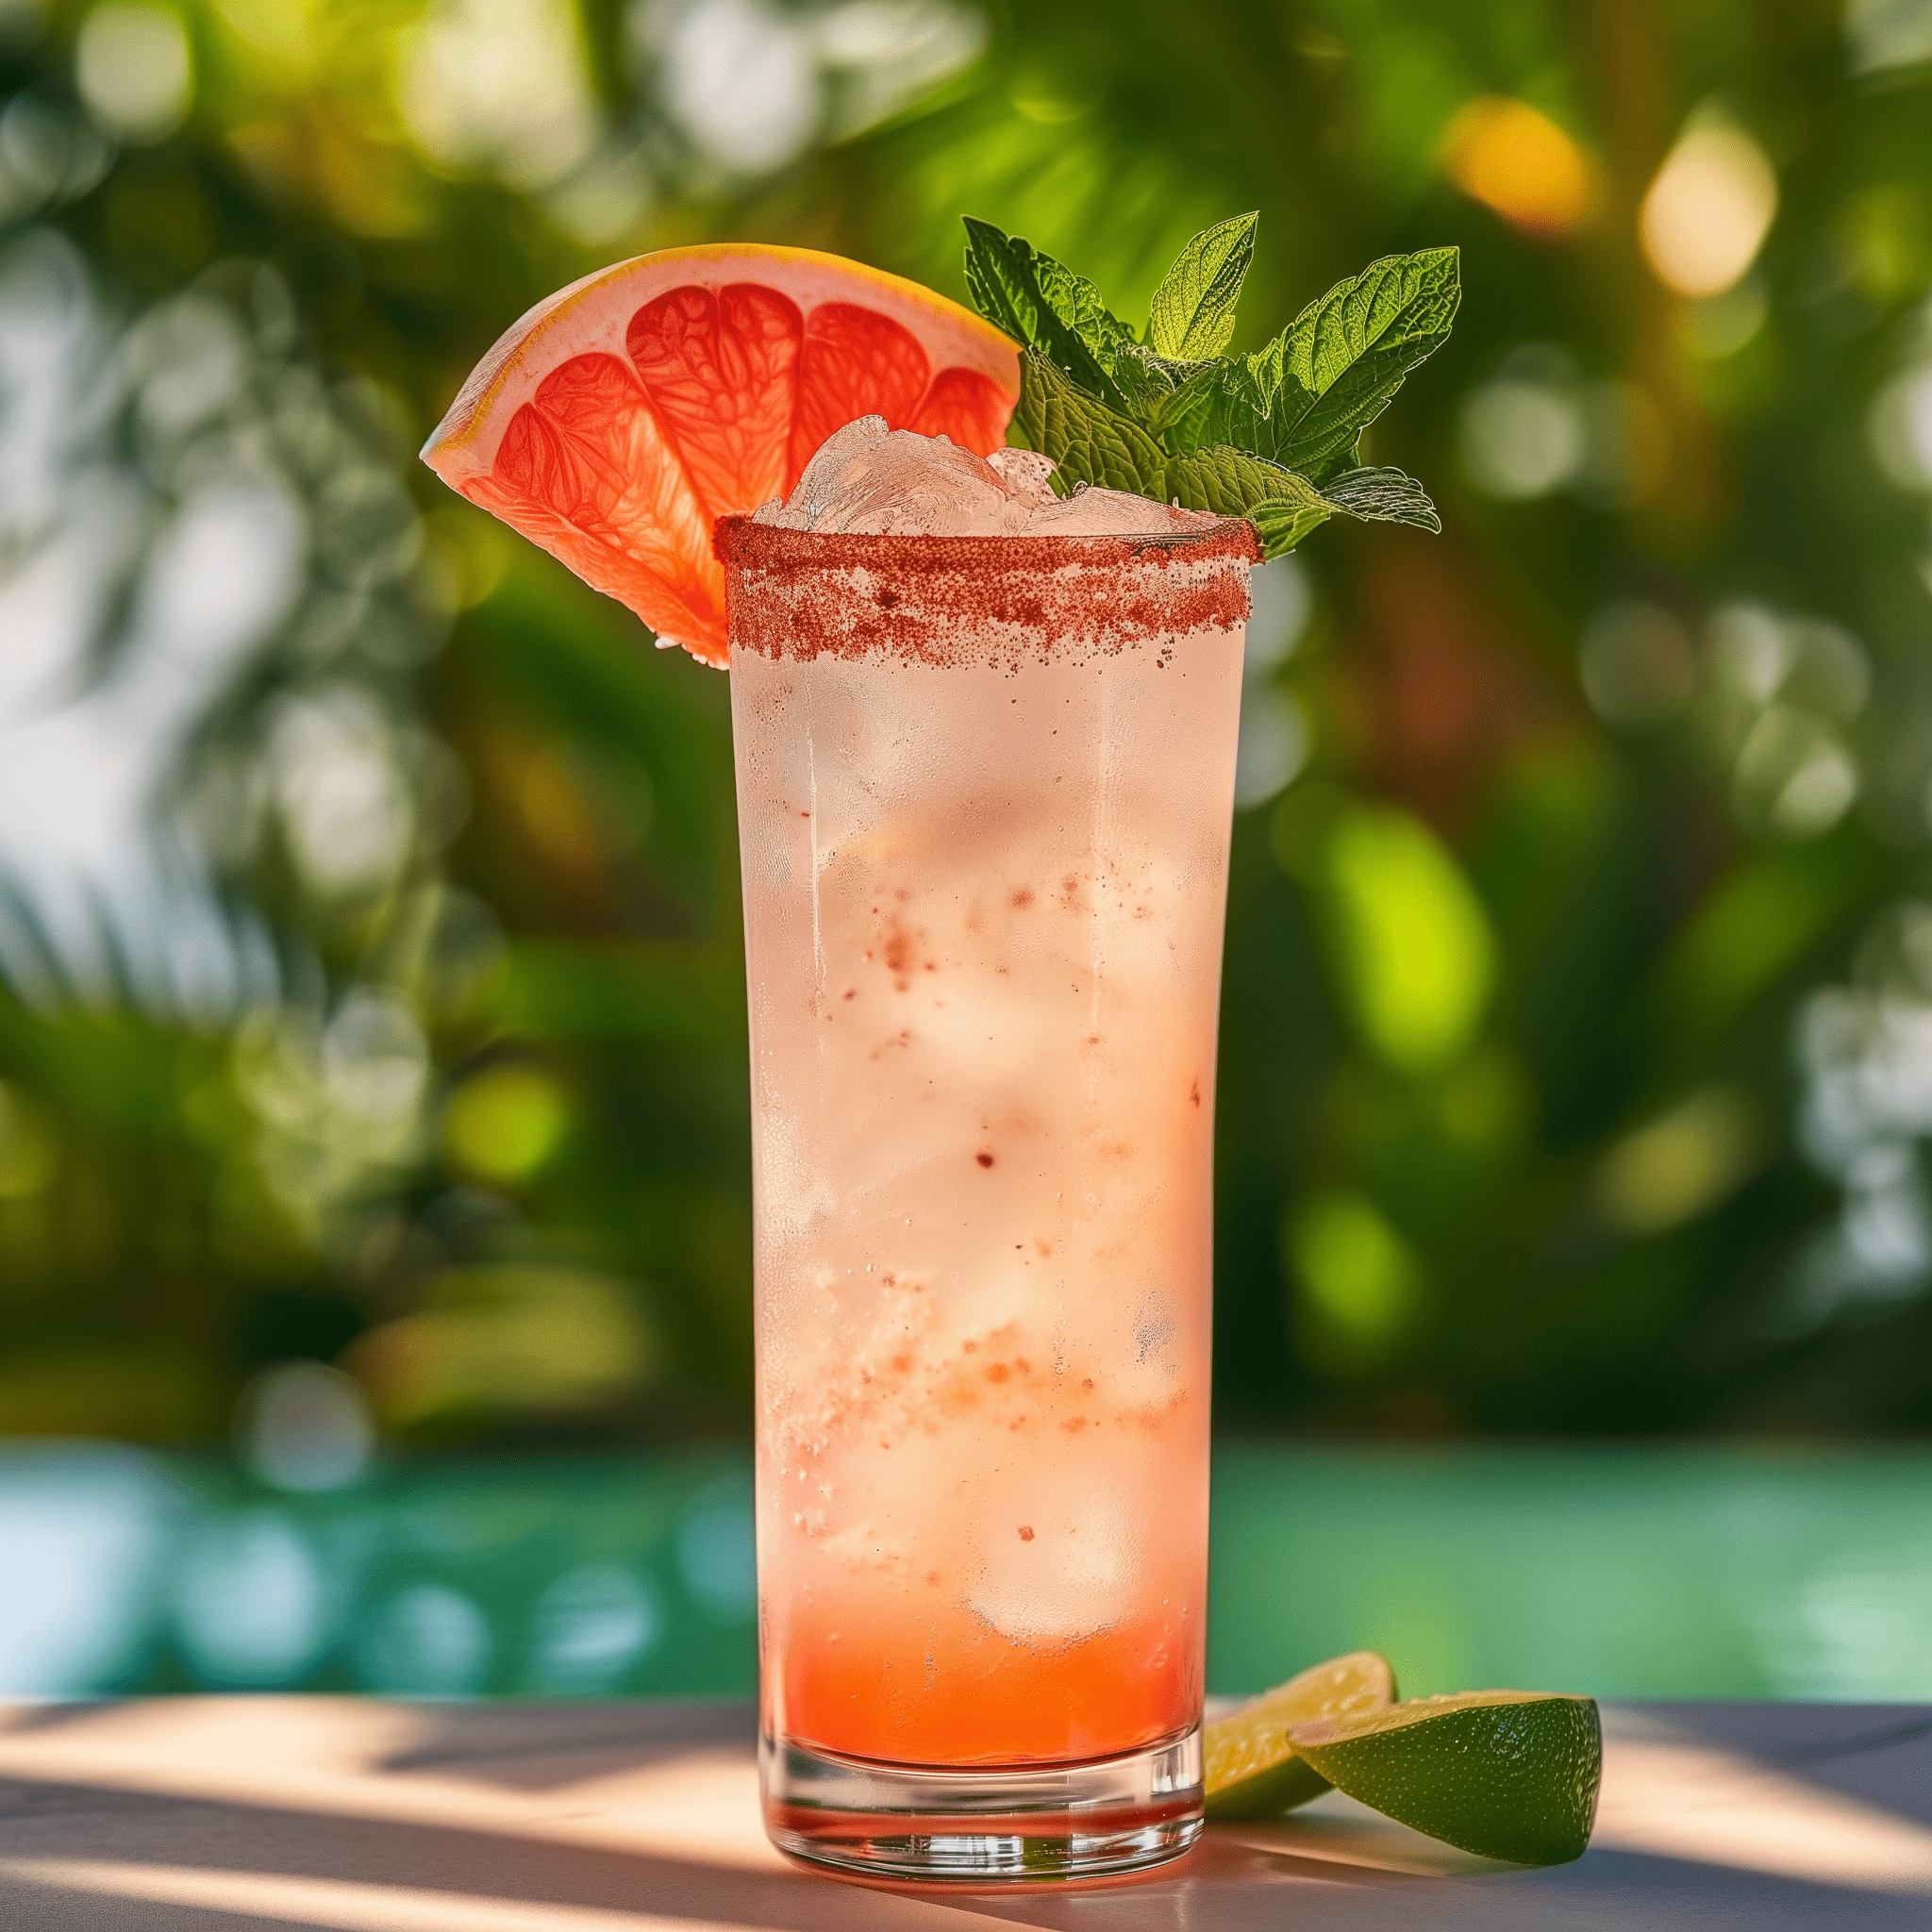 Grapefruit Hibiscus Tequila Sparkler Cocktail Recipe - This cocktail offers a delightful dance of flavors. The grapefruit provides a zesty, slightly bitter citrus punch, while the hibiscus infuses a subtle floral sweetness. The tequila grounds the drink with its earthy robustness, and the Tajin rim adds a spicy, tangy kick.